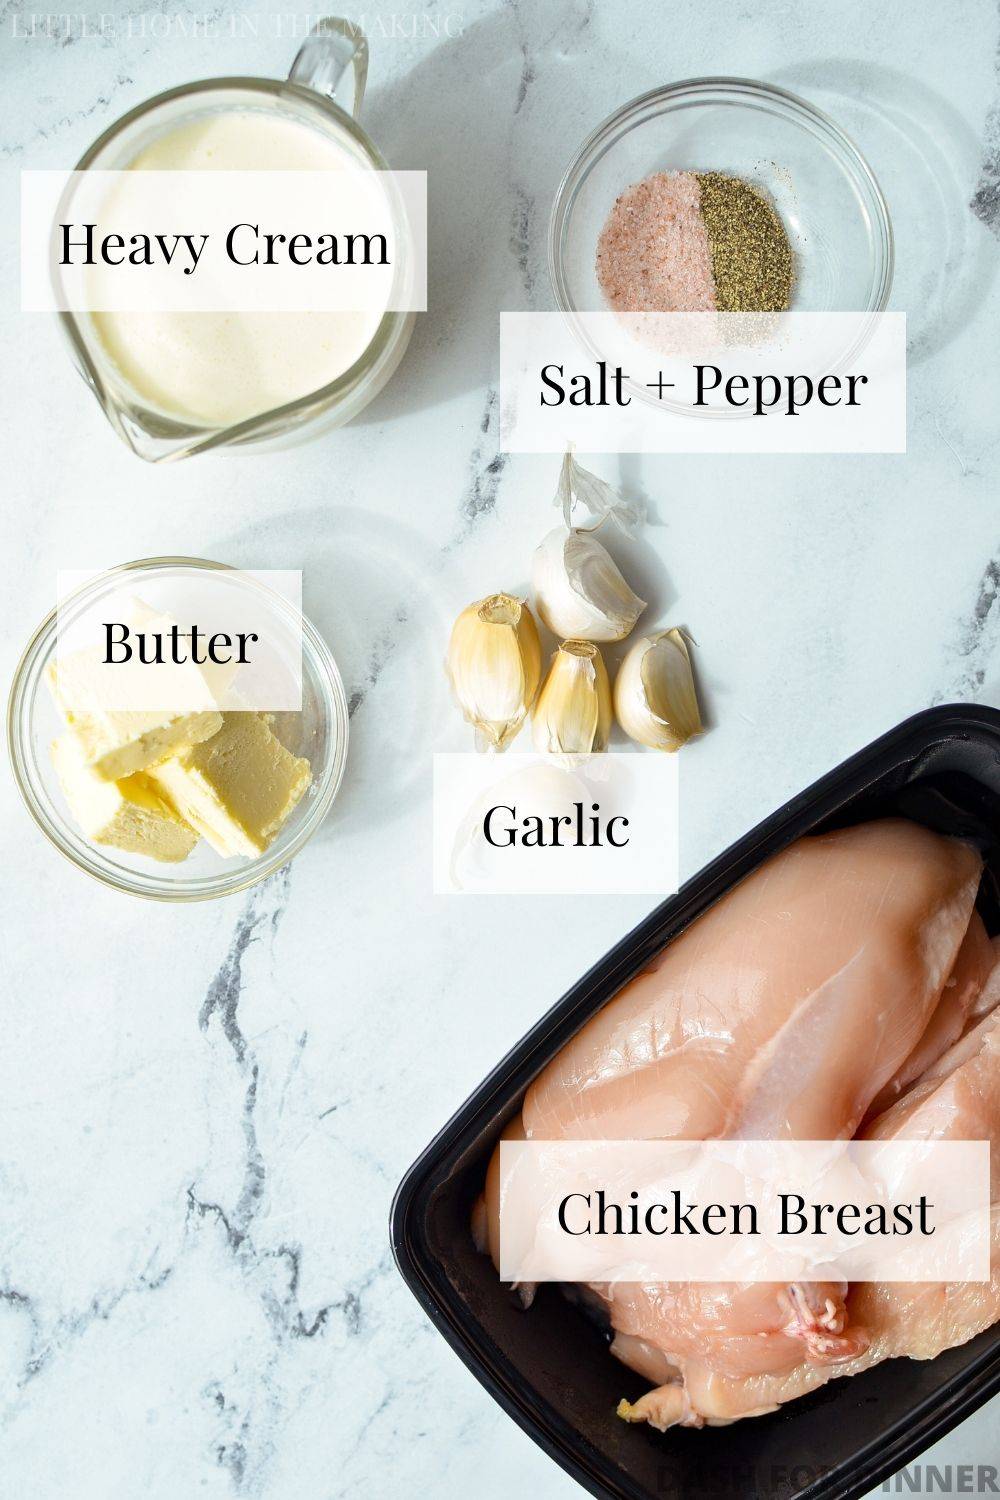 The ingredients needed to make creamy garlic chicken, including heavy cream, butter, and garlic.